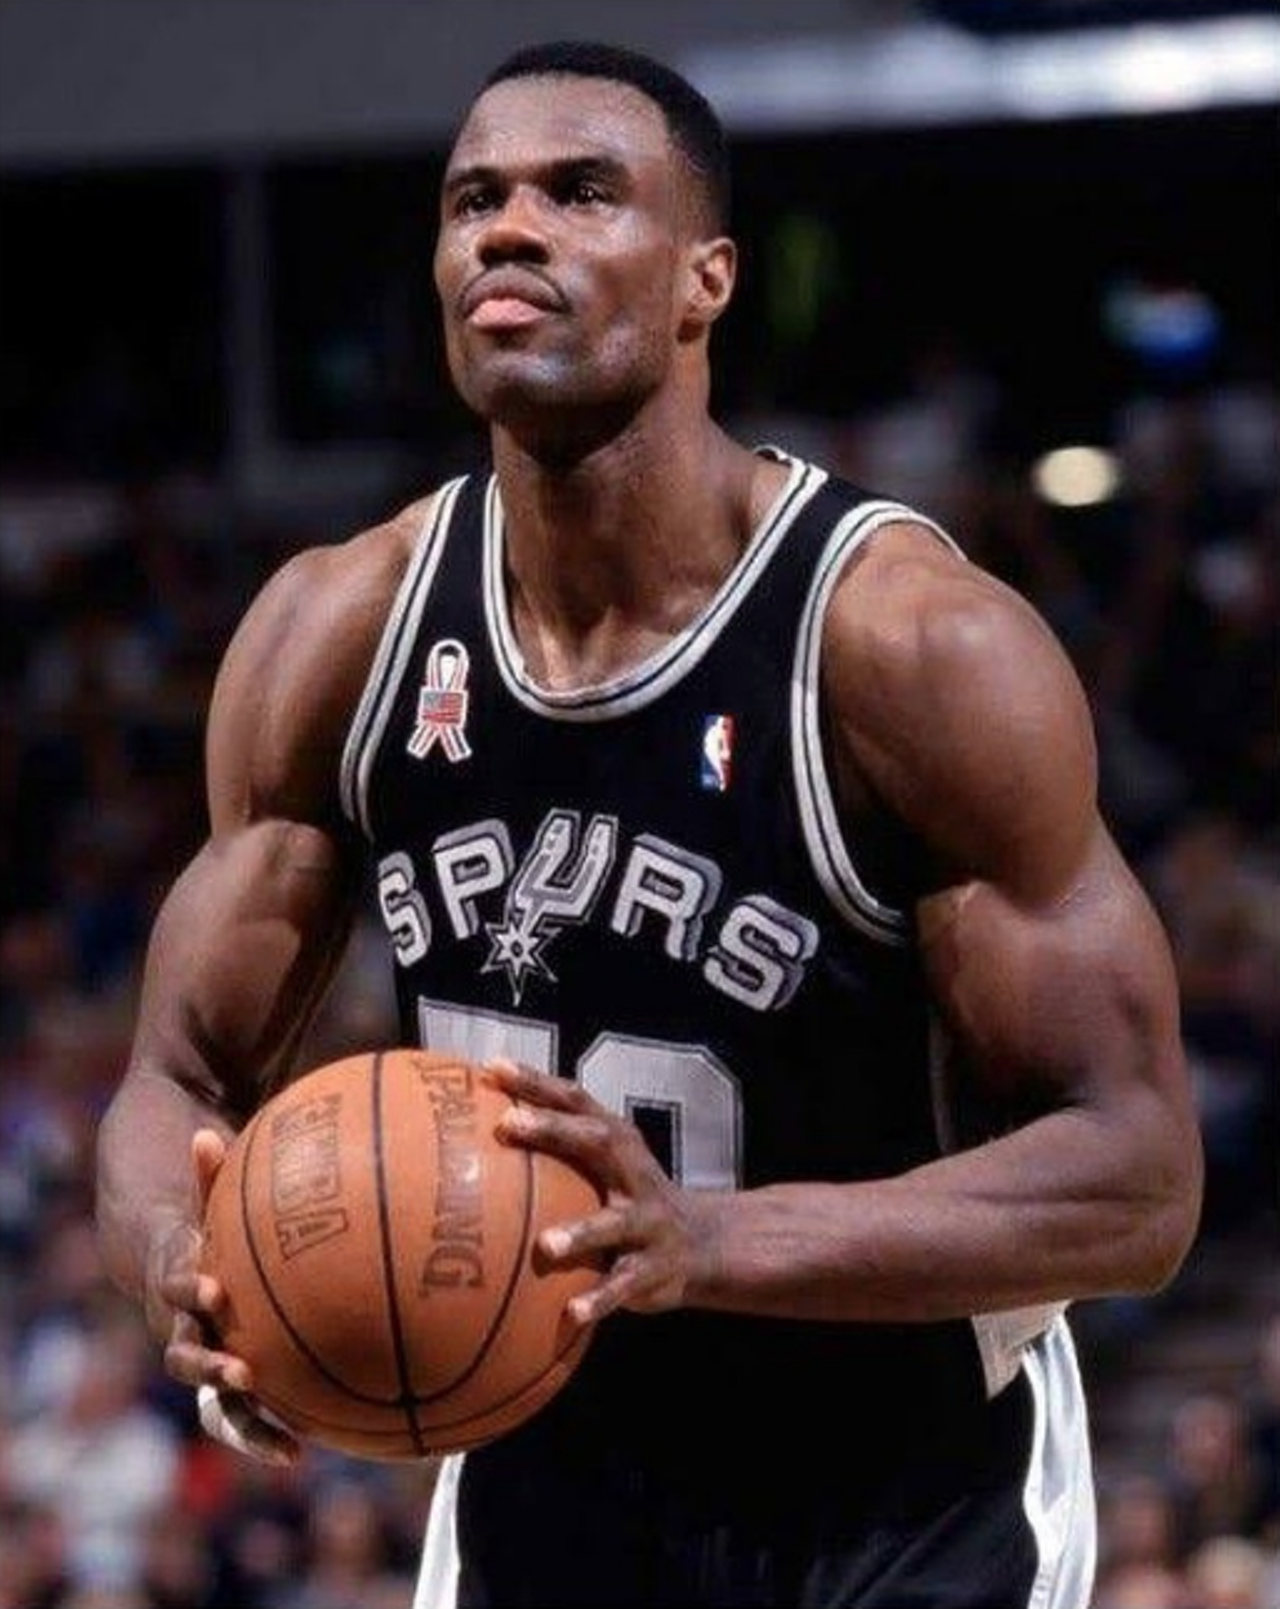 David Robinson
Though he famously attended the United States Naval Academy,  gaining him the nickname of the “Admiral,” Robinson decided to spend some time studying in San Antonio following his NBA career with the Spurs. In 2011, the basketball legend earned a Master of Arts in Administration, with a concentration in organizational development. Robinson previously said he wanted to better “understand how businesses work and how to build them.”
Photo via Instagram / hoops_podcast